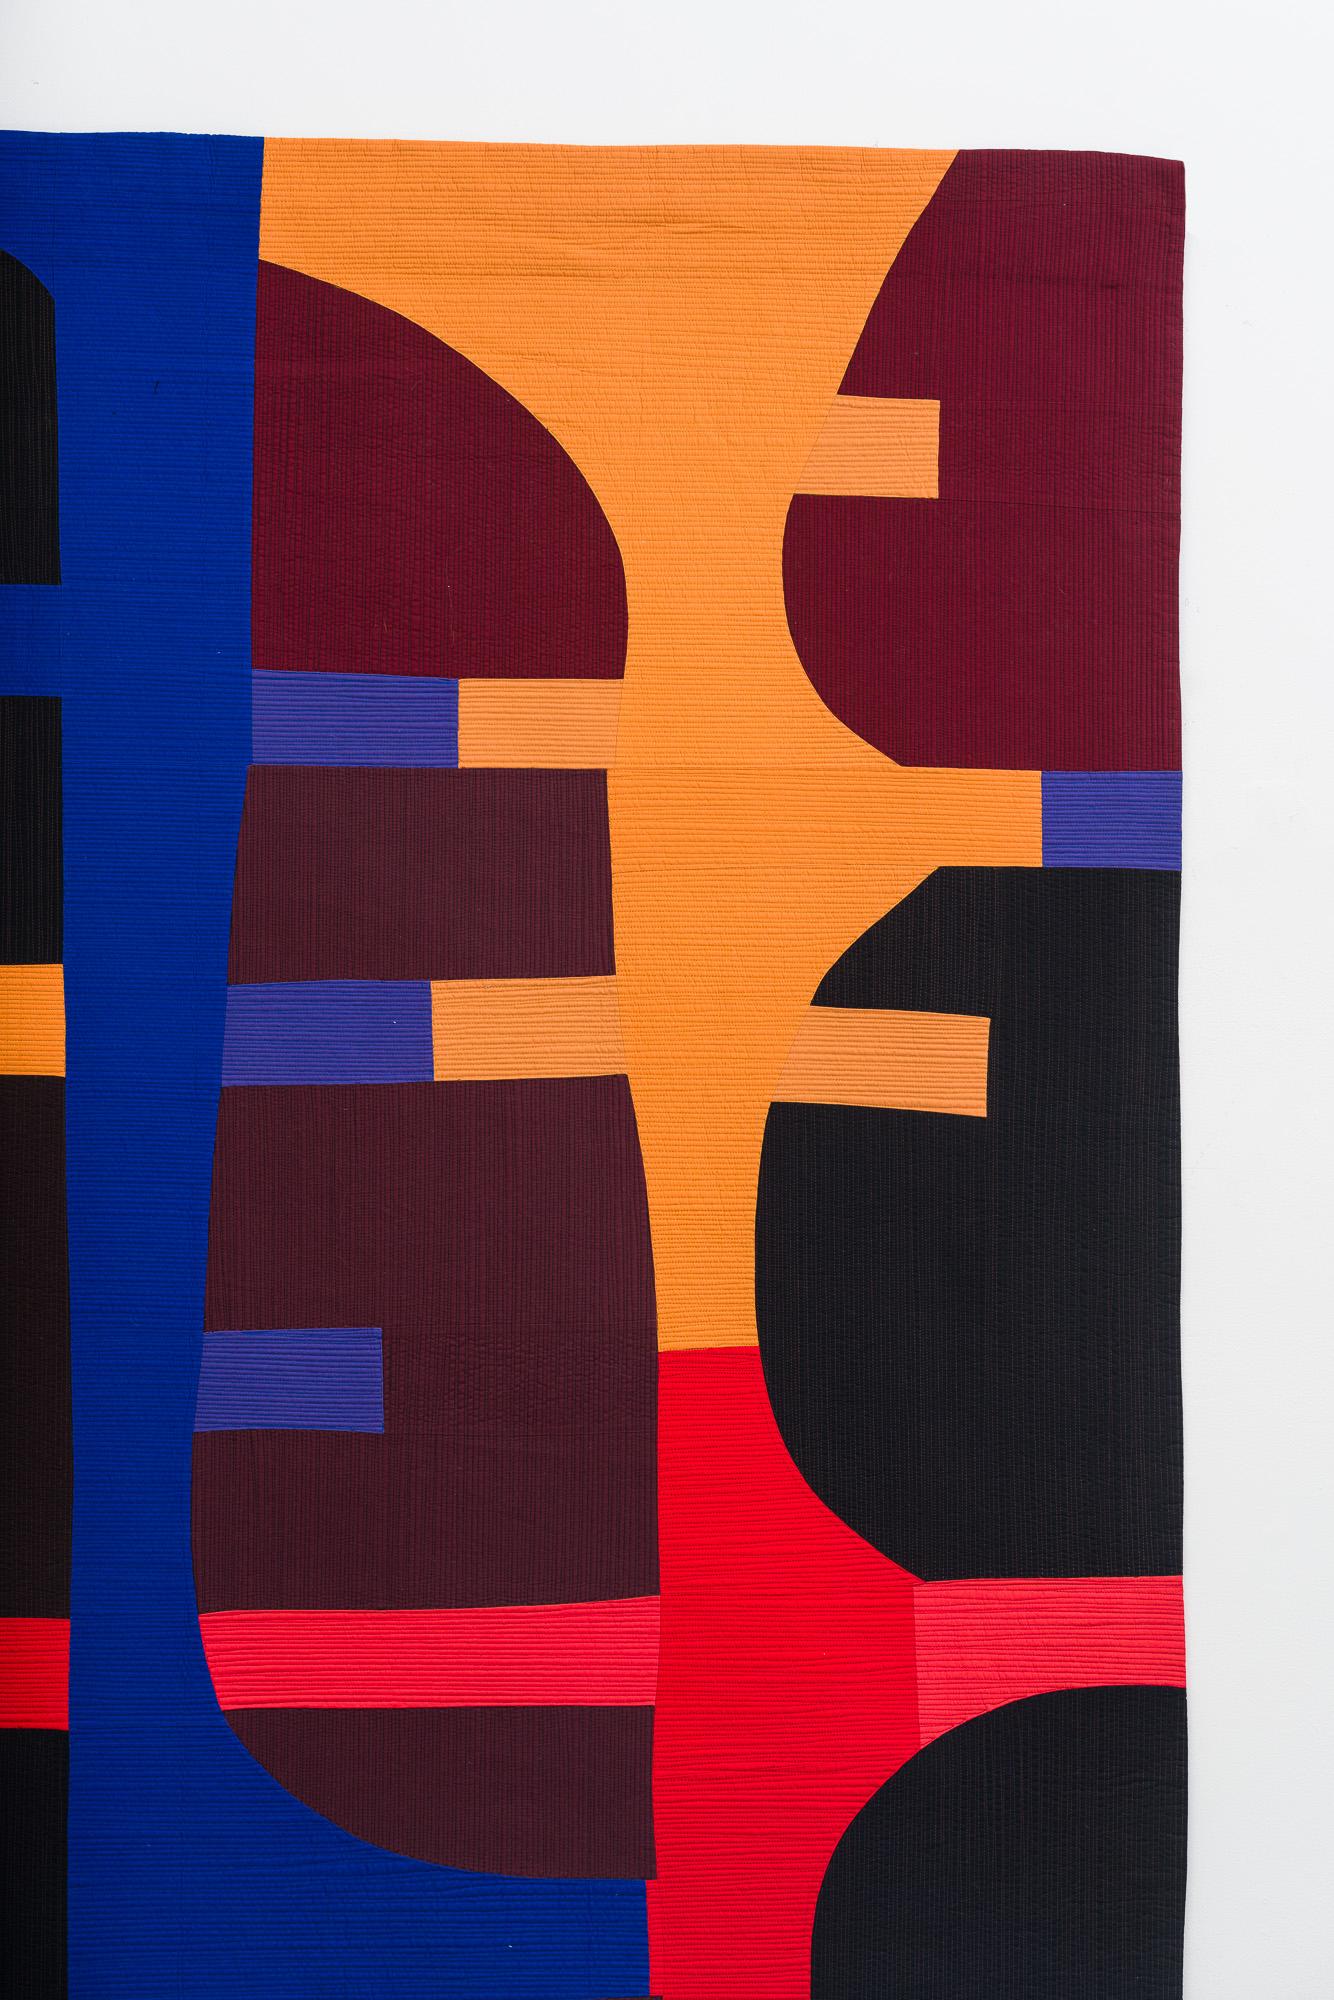 By taking ordinary pieces of cotton and transforming them into forceful collages of luminous color, contemporary textile artist Gerri Spilka brings together disparate elements of quilting, modern abstraction, and human interaction to re-imagine work